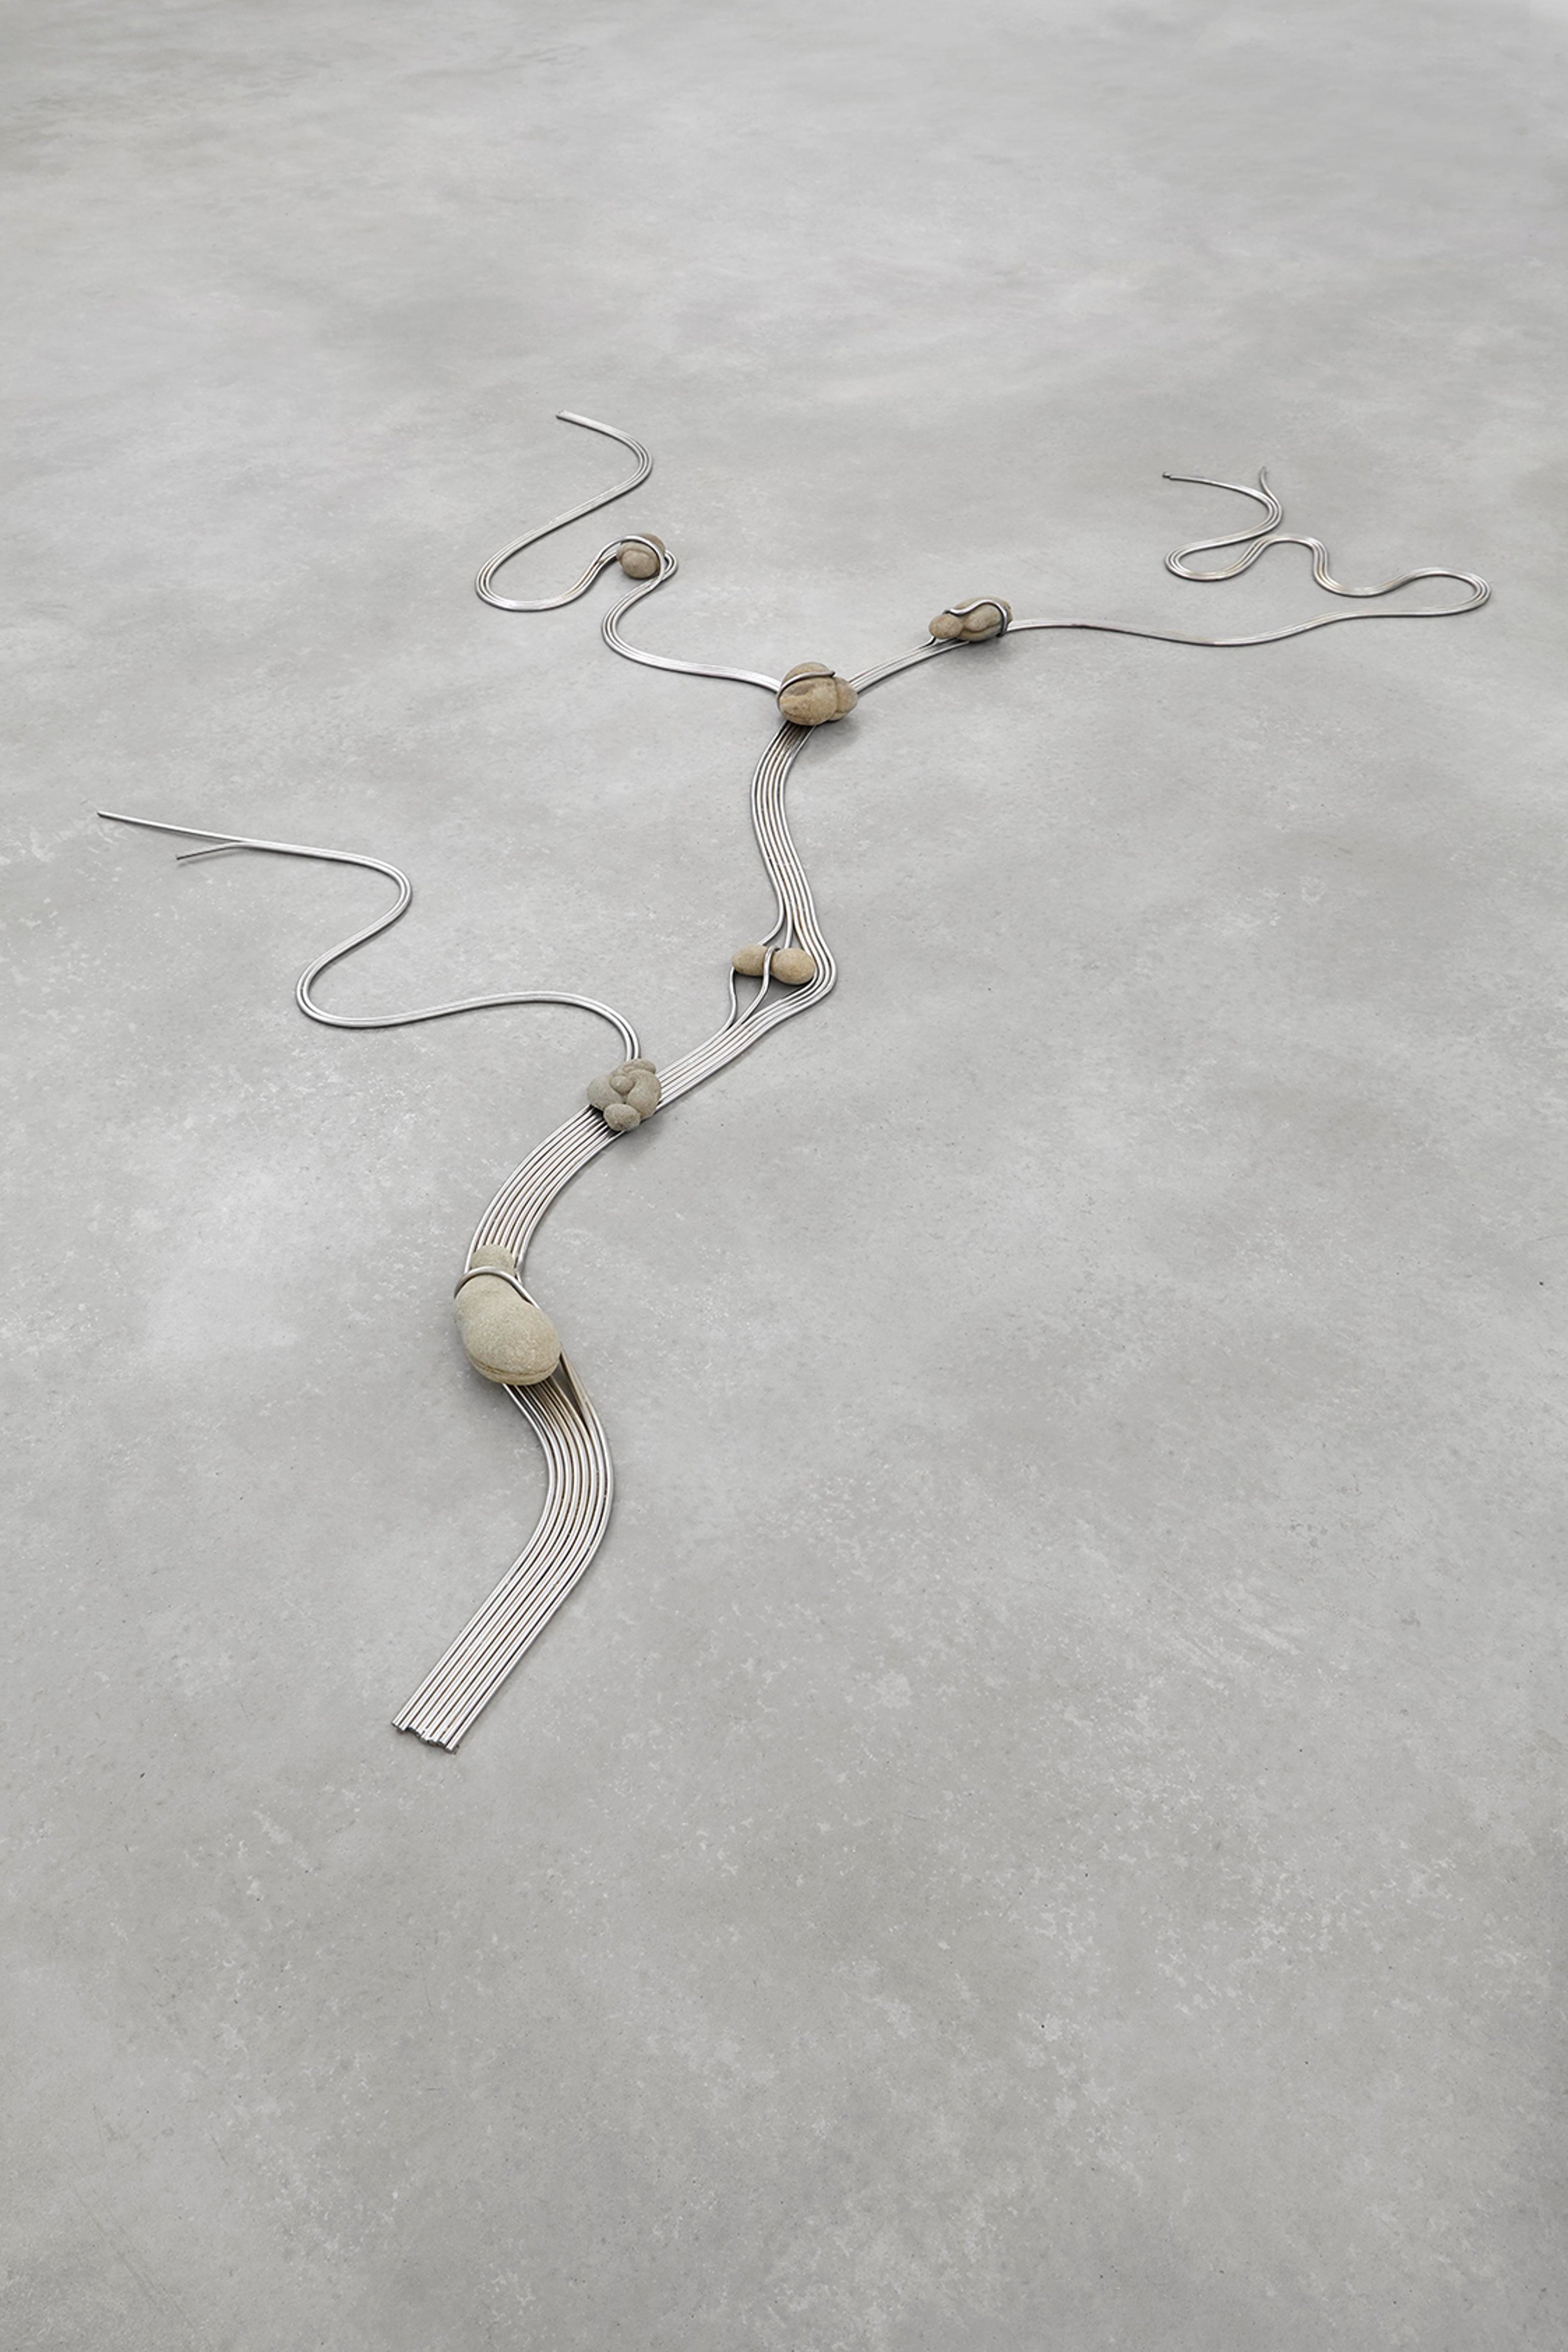 Rocks tied with metal wires on concrete flooring